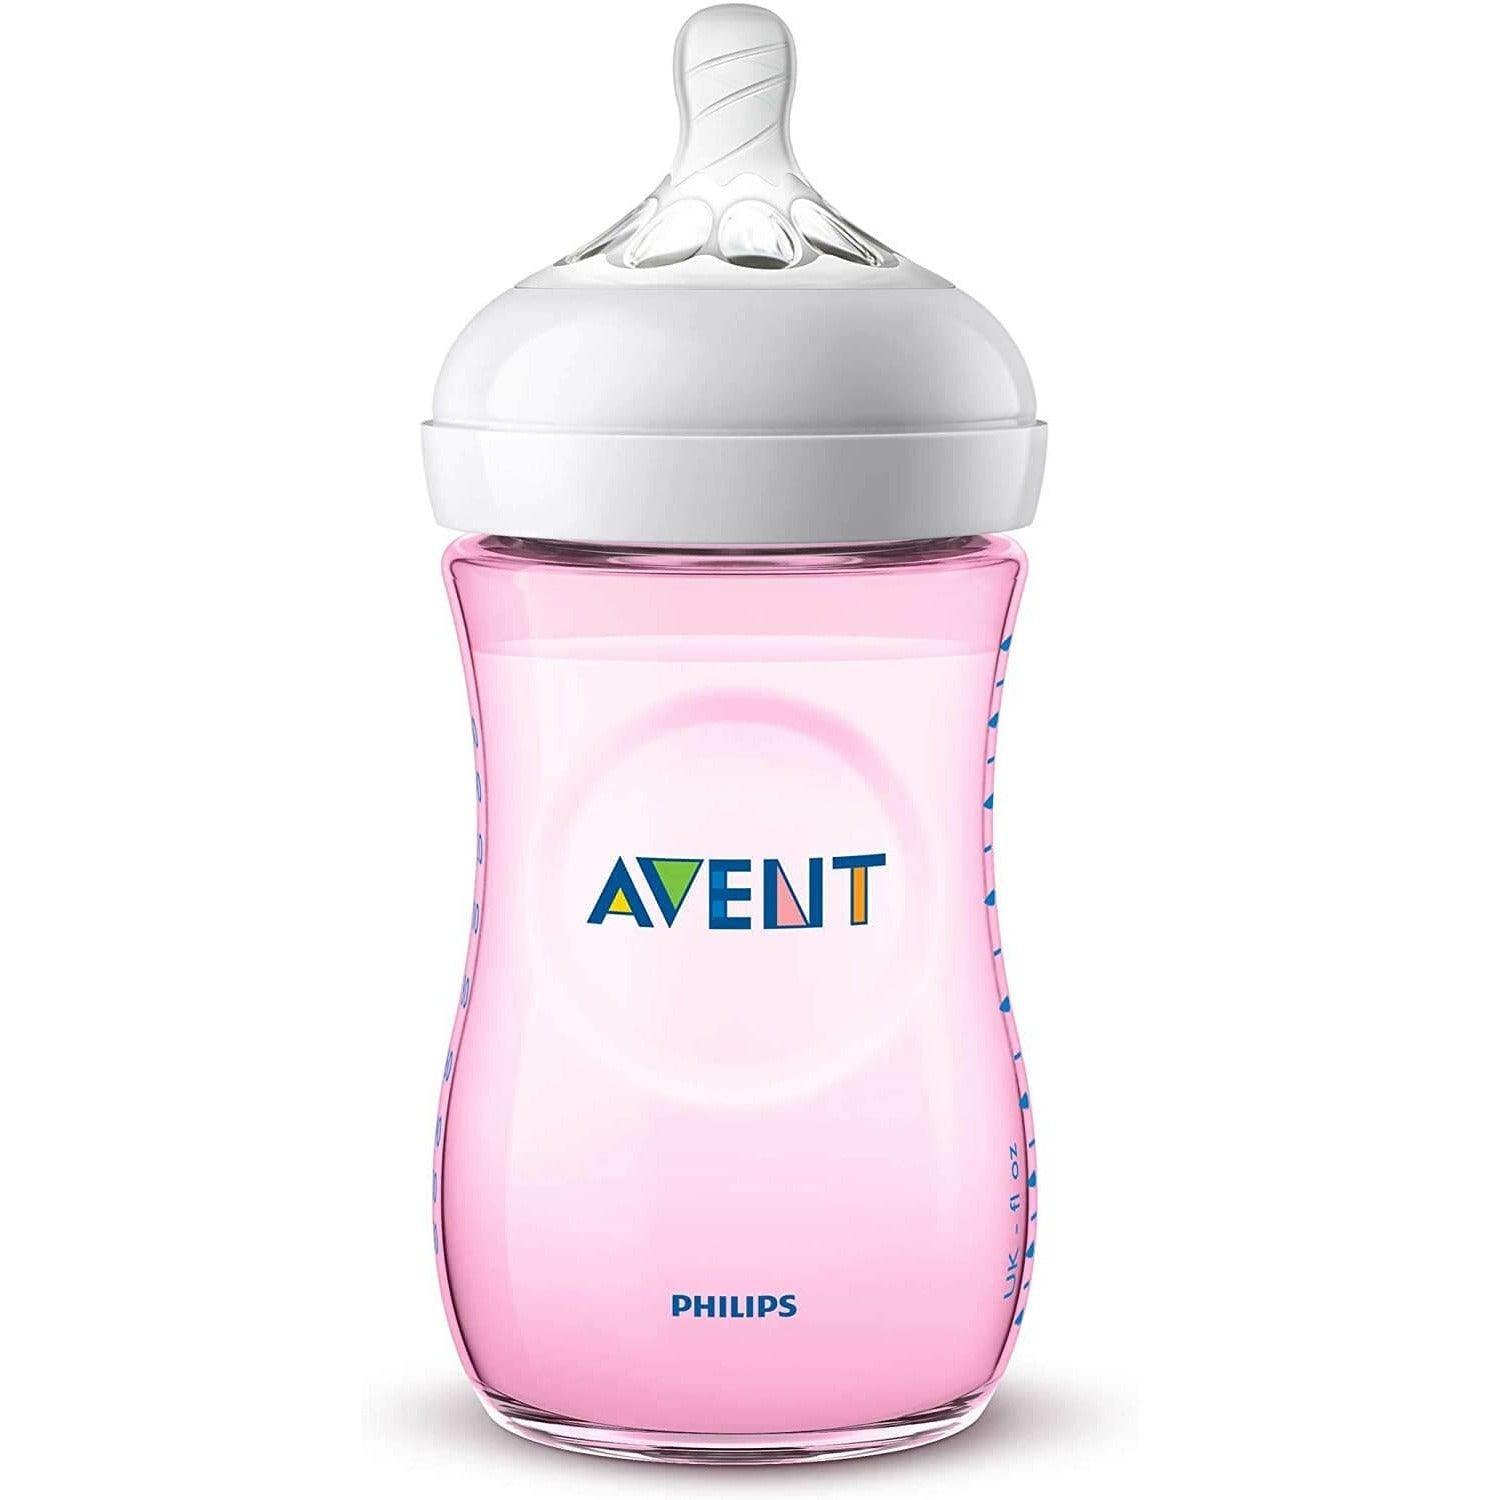 Philips Avent Natural Baby Bottle, 260 ml, Pink - Set of 2 - Ourkids - Philips Avent